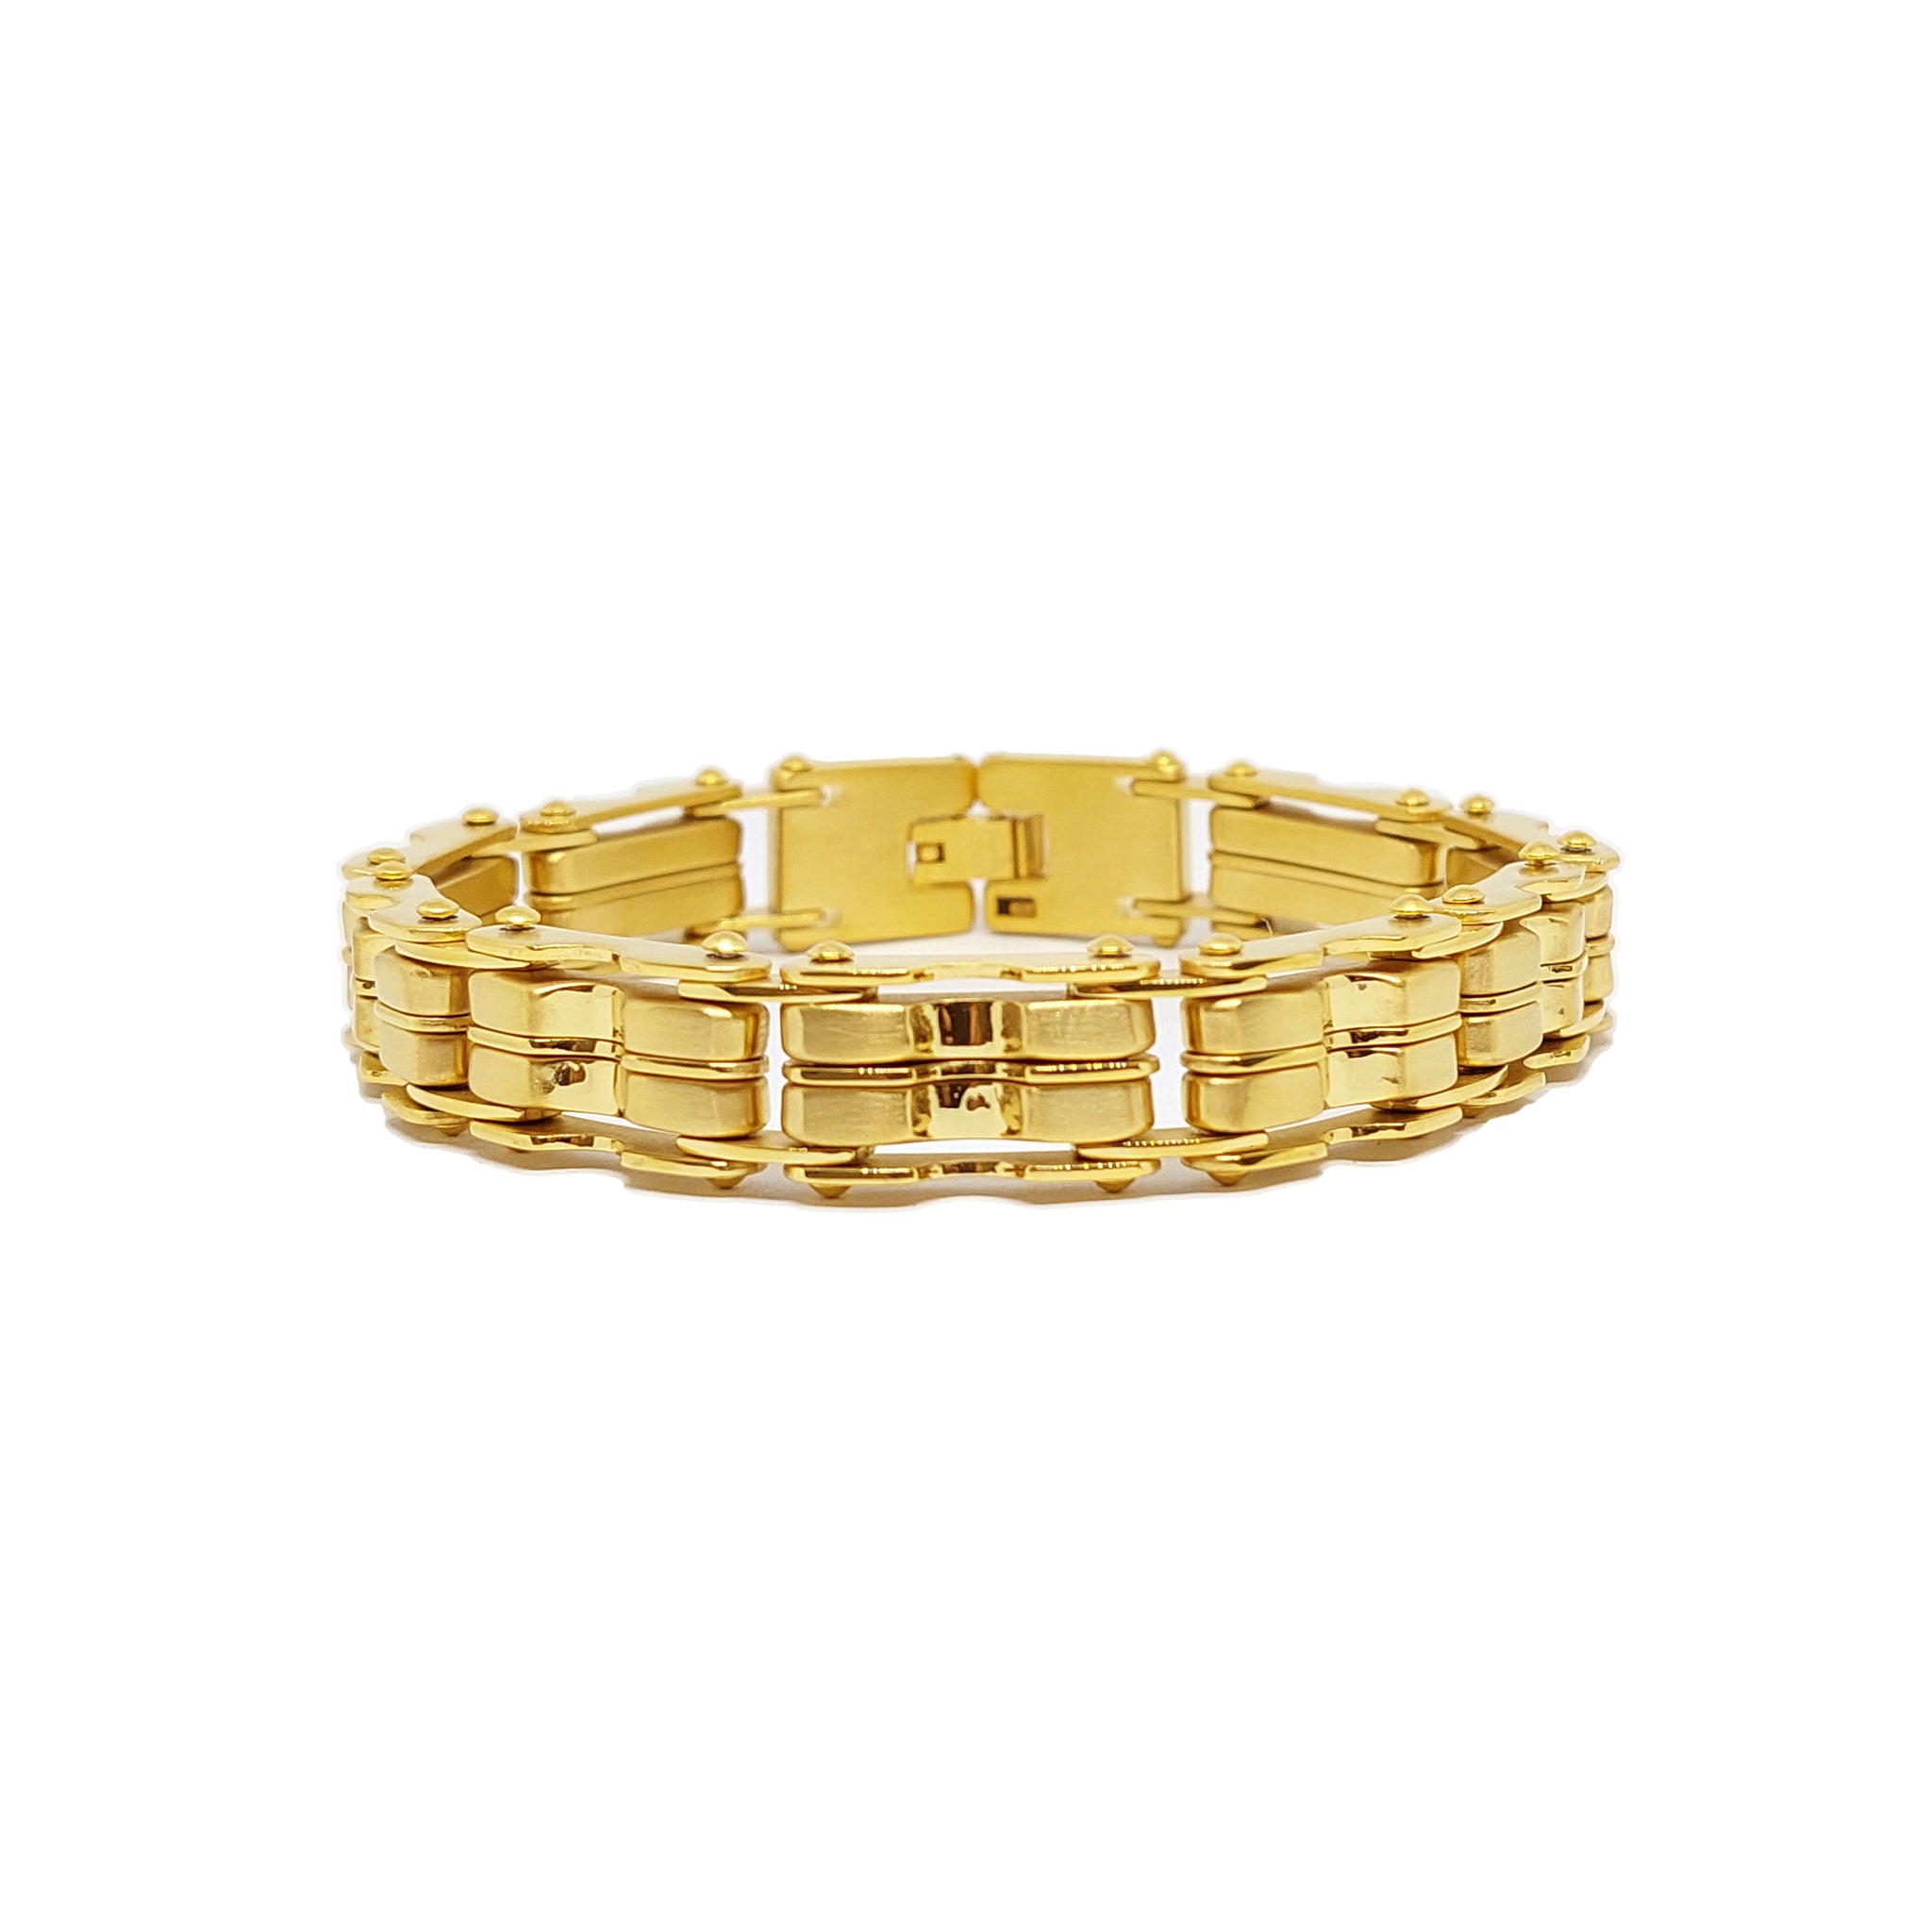 ESBL 7977: All IPG Double Bar Intertwined Male Bracelet